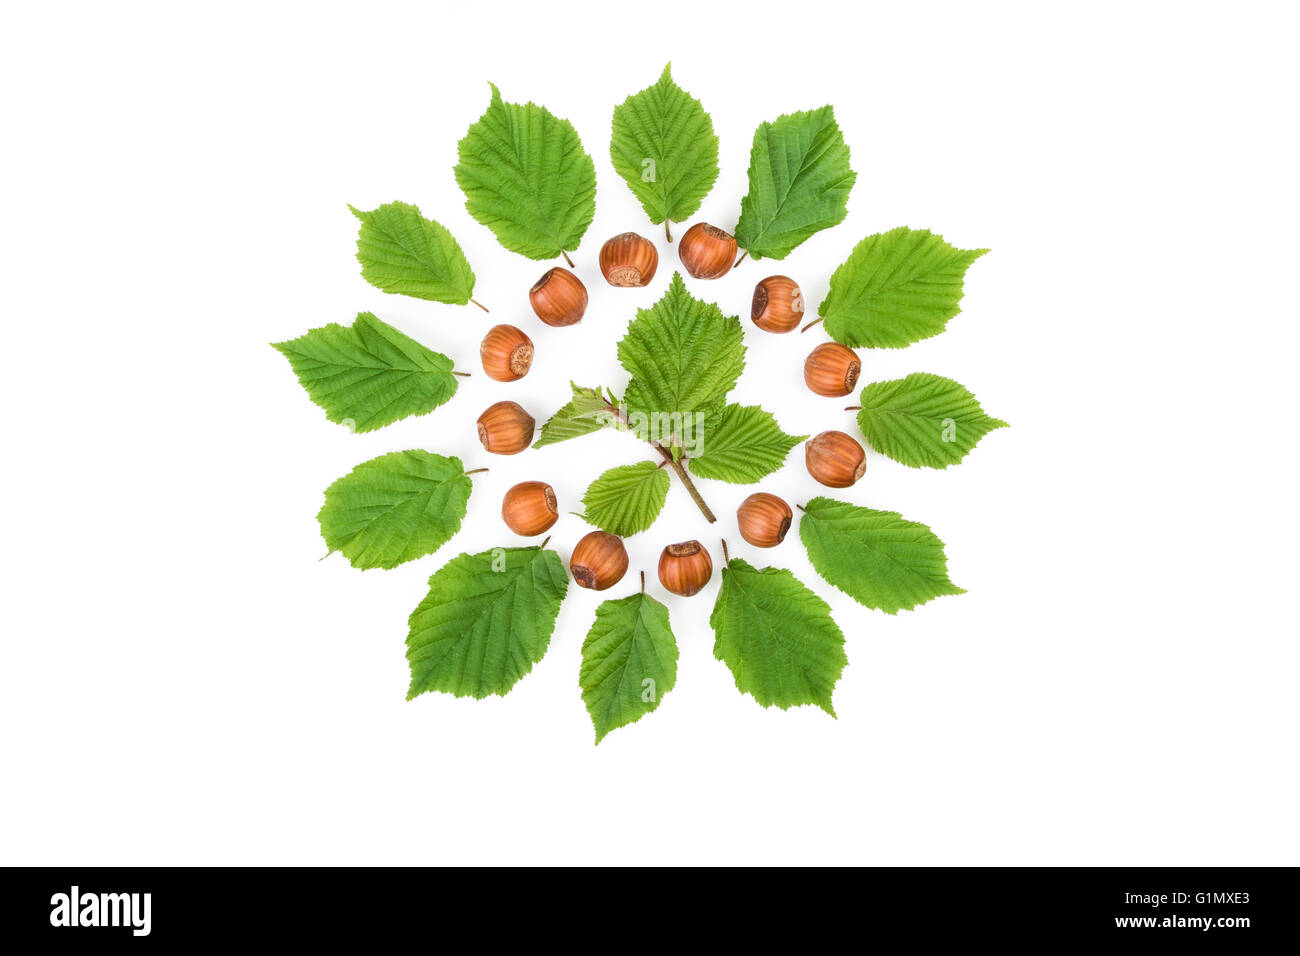 Creative arrangement of filbert nuts with leaves on white. Flat lay, top view. Stock Photo